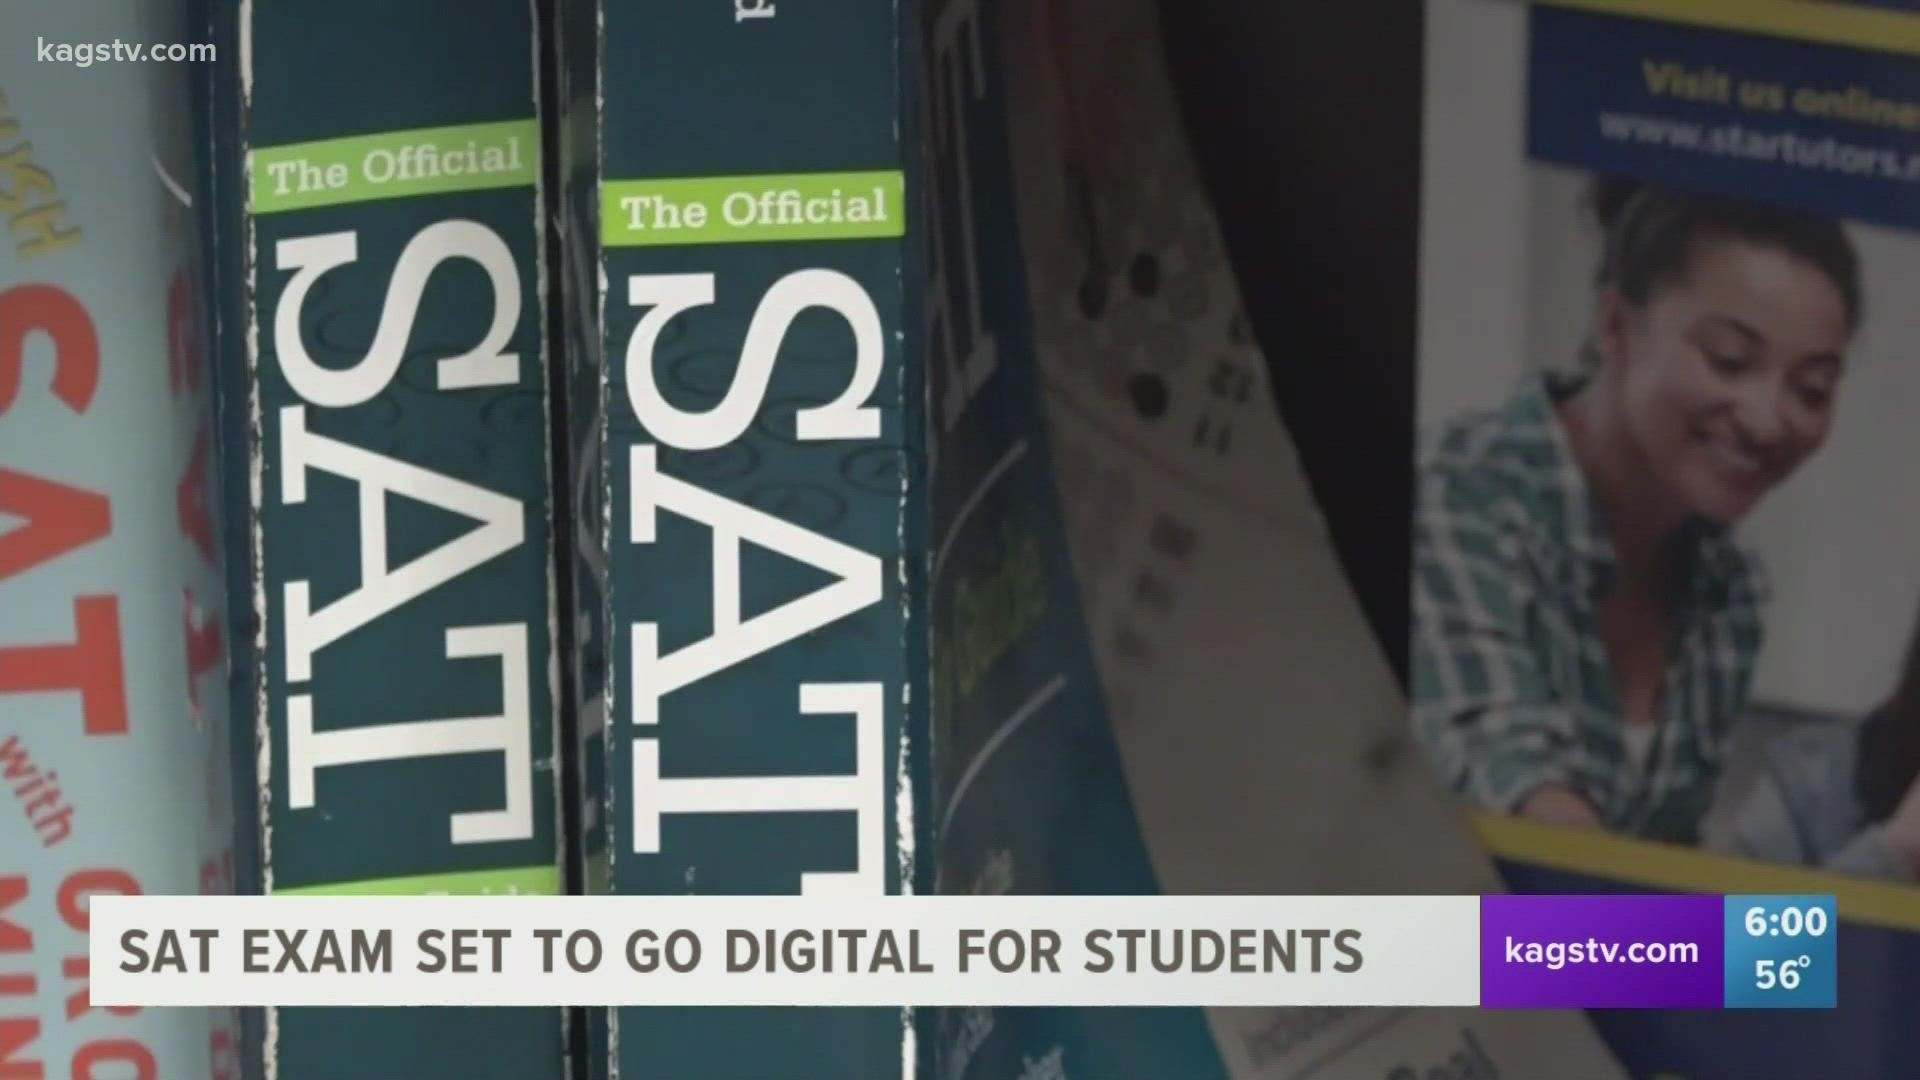 The College Board announced the SAT exam for high school students would move to an online format in 2024 for U.S. students.